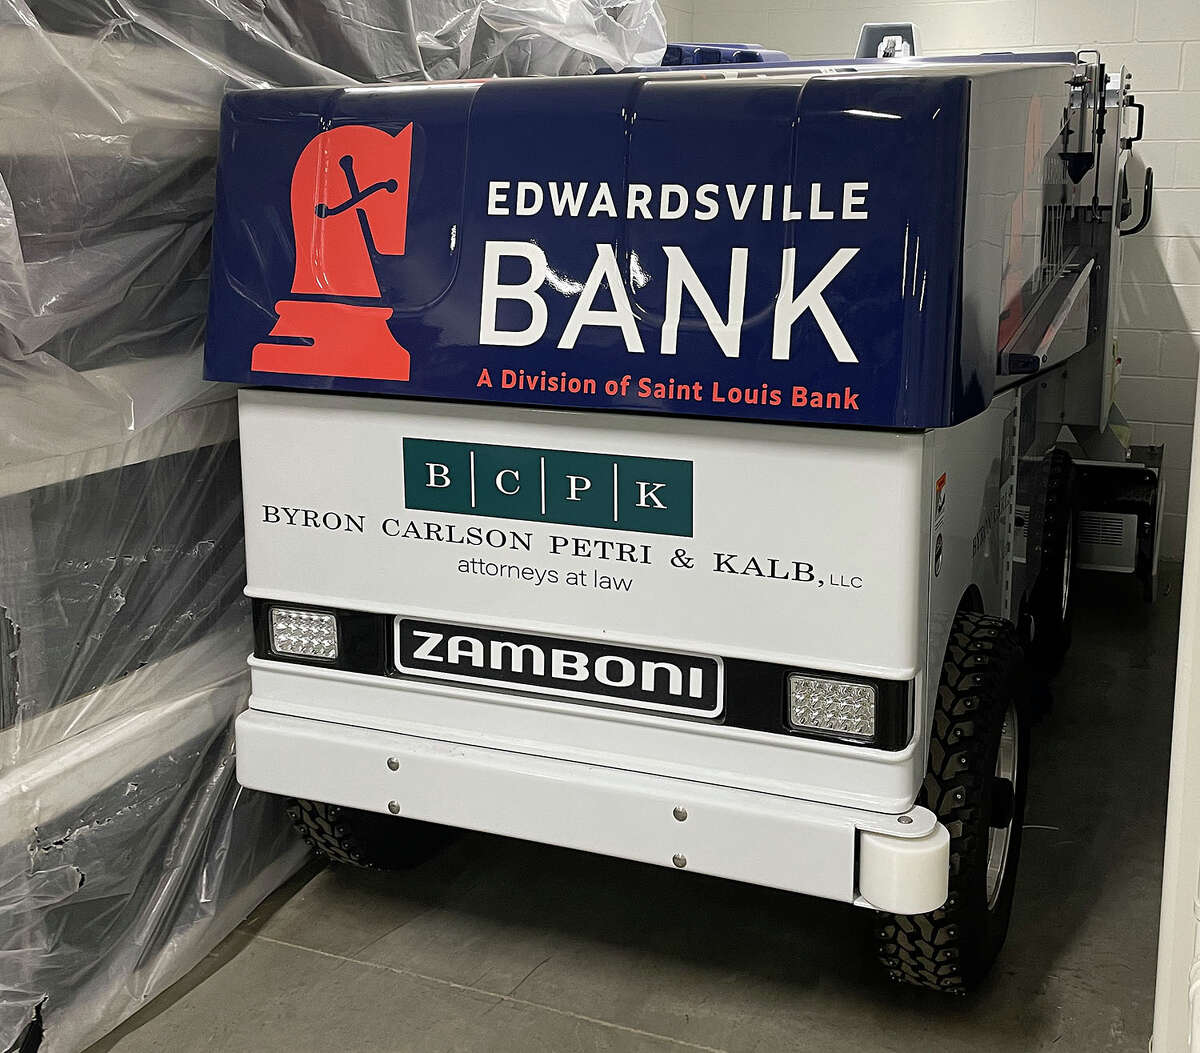 The Zamboni as it was tucked into its space Thursday at the R.P. Lumber Center.